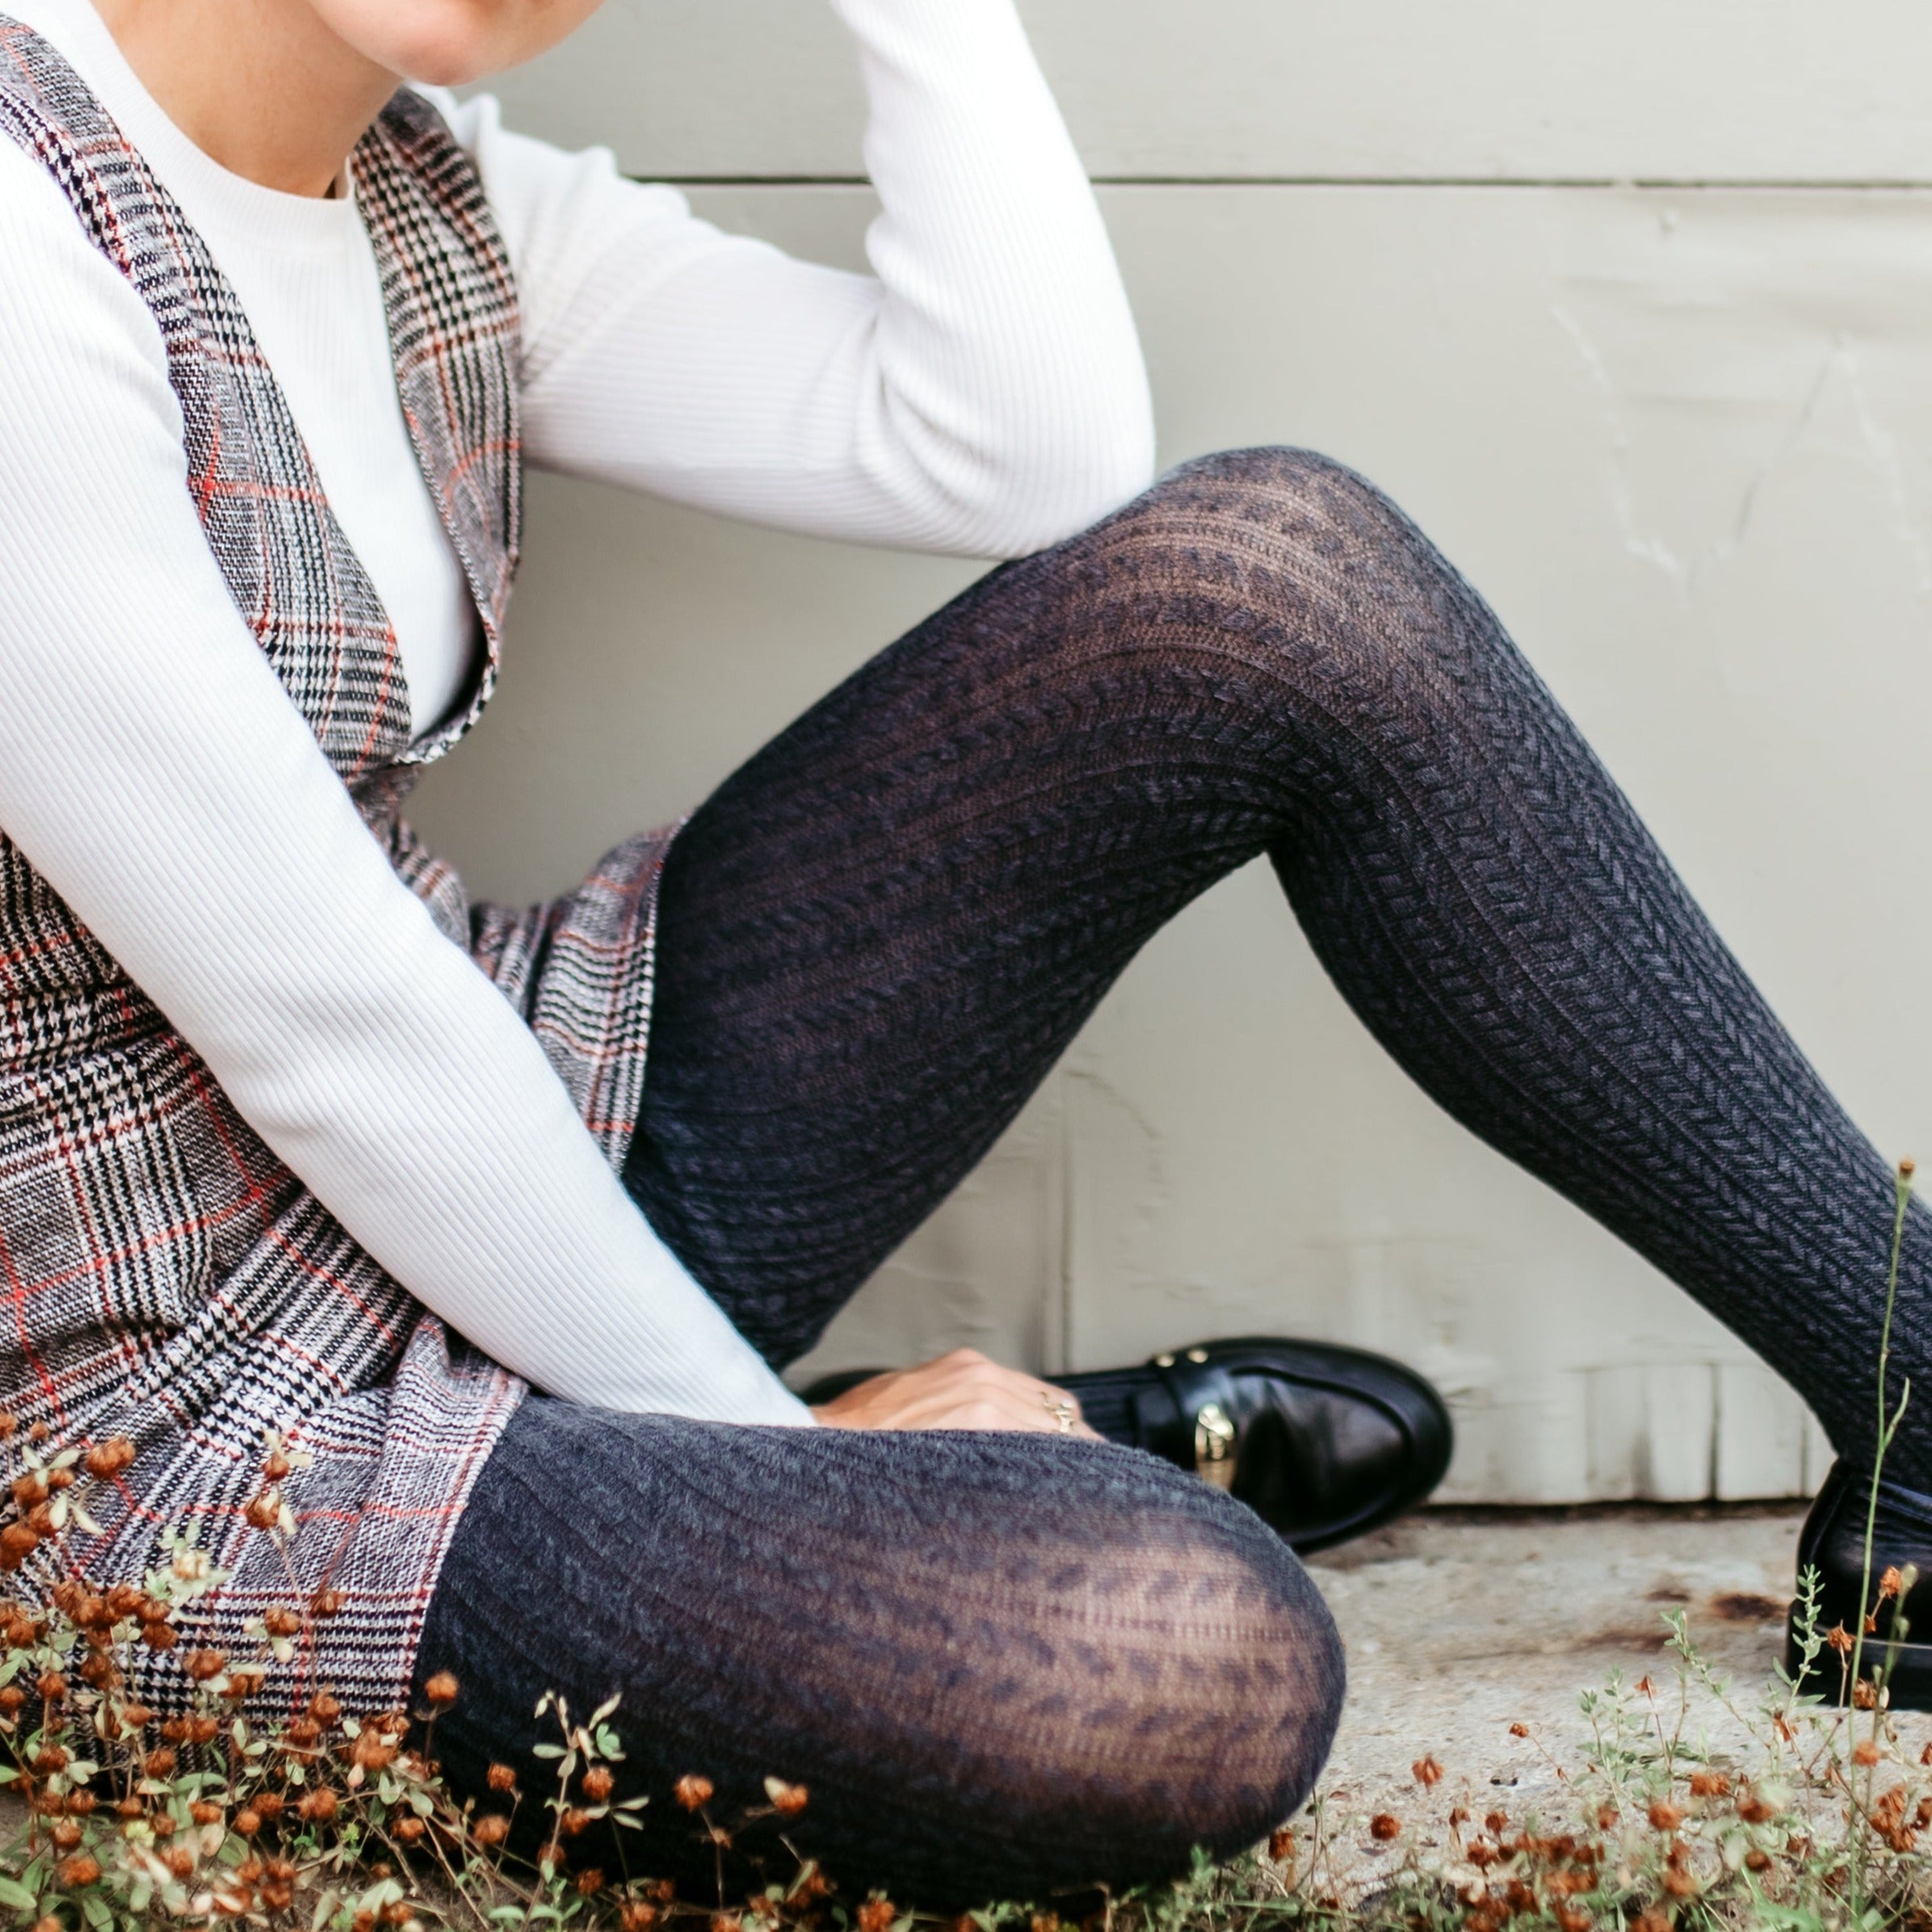 Sweater and gray knit - Fashionmylegs : The tights and hosiery blog